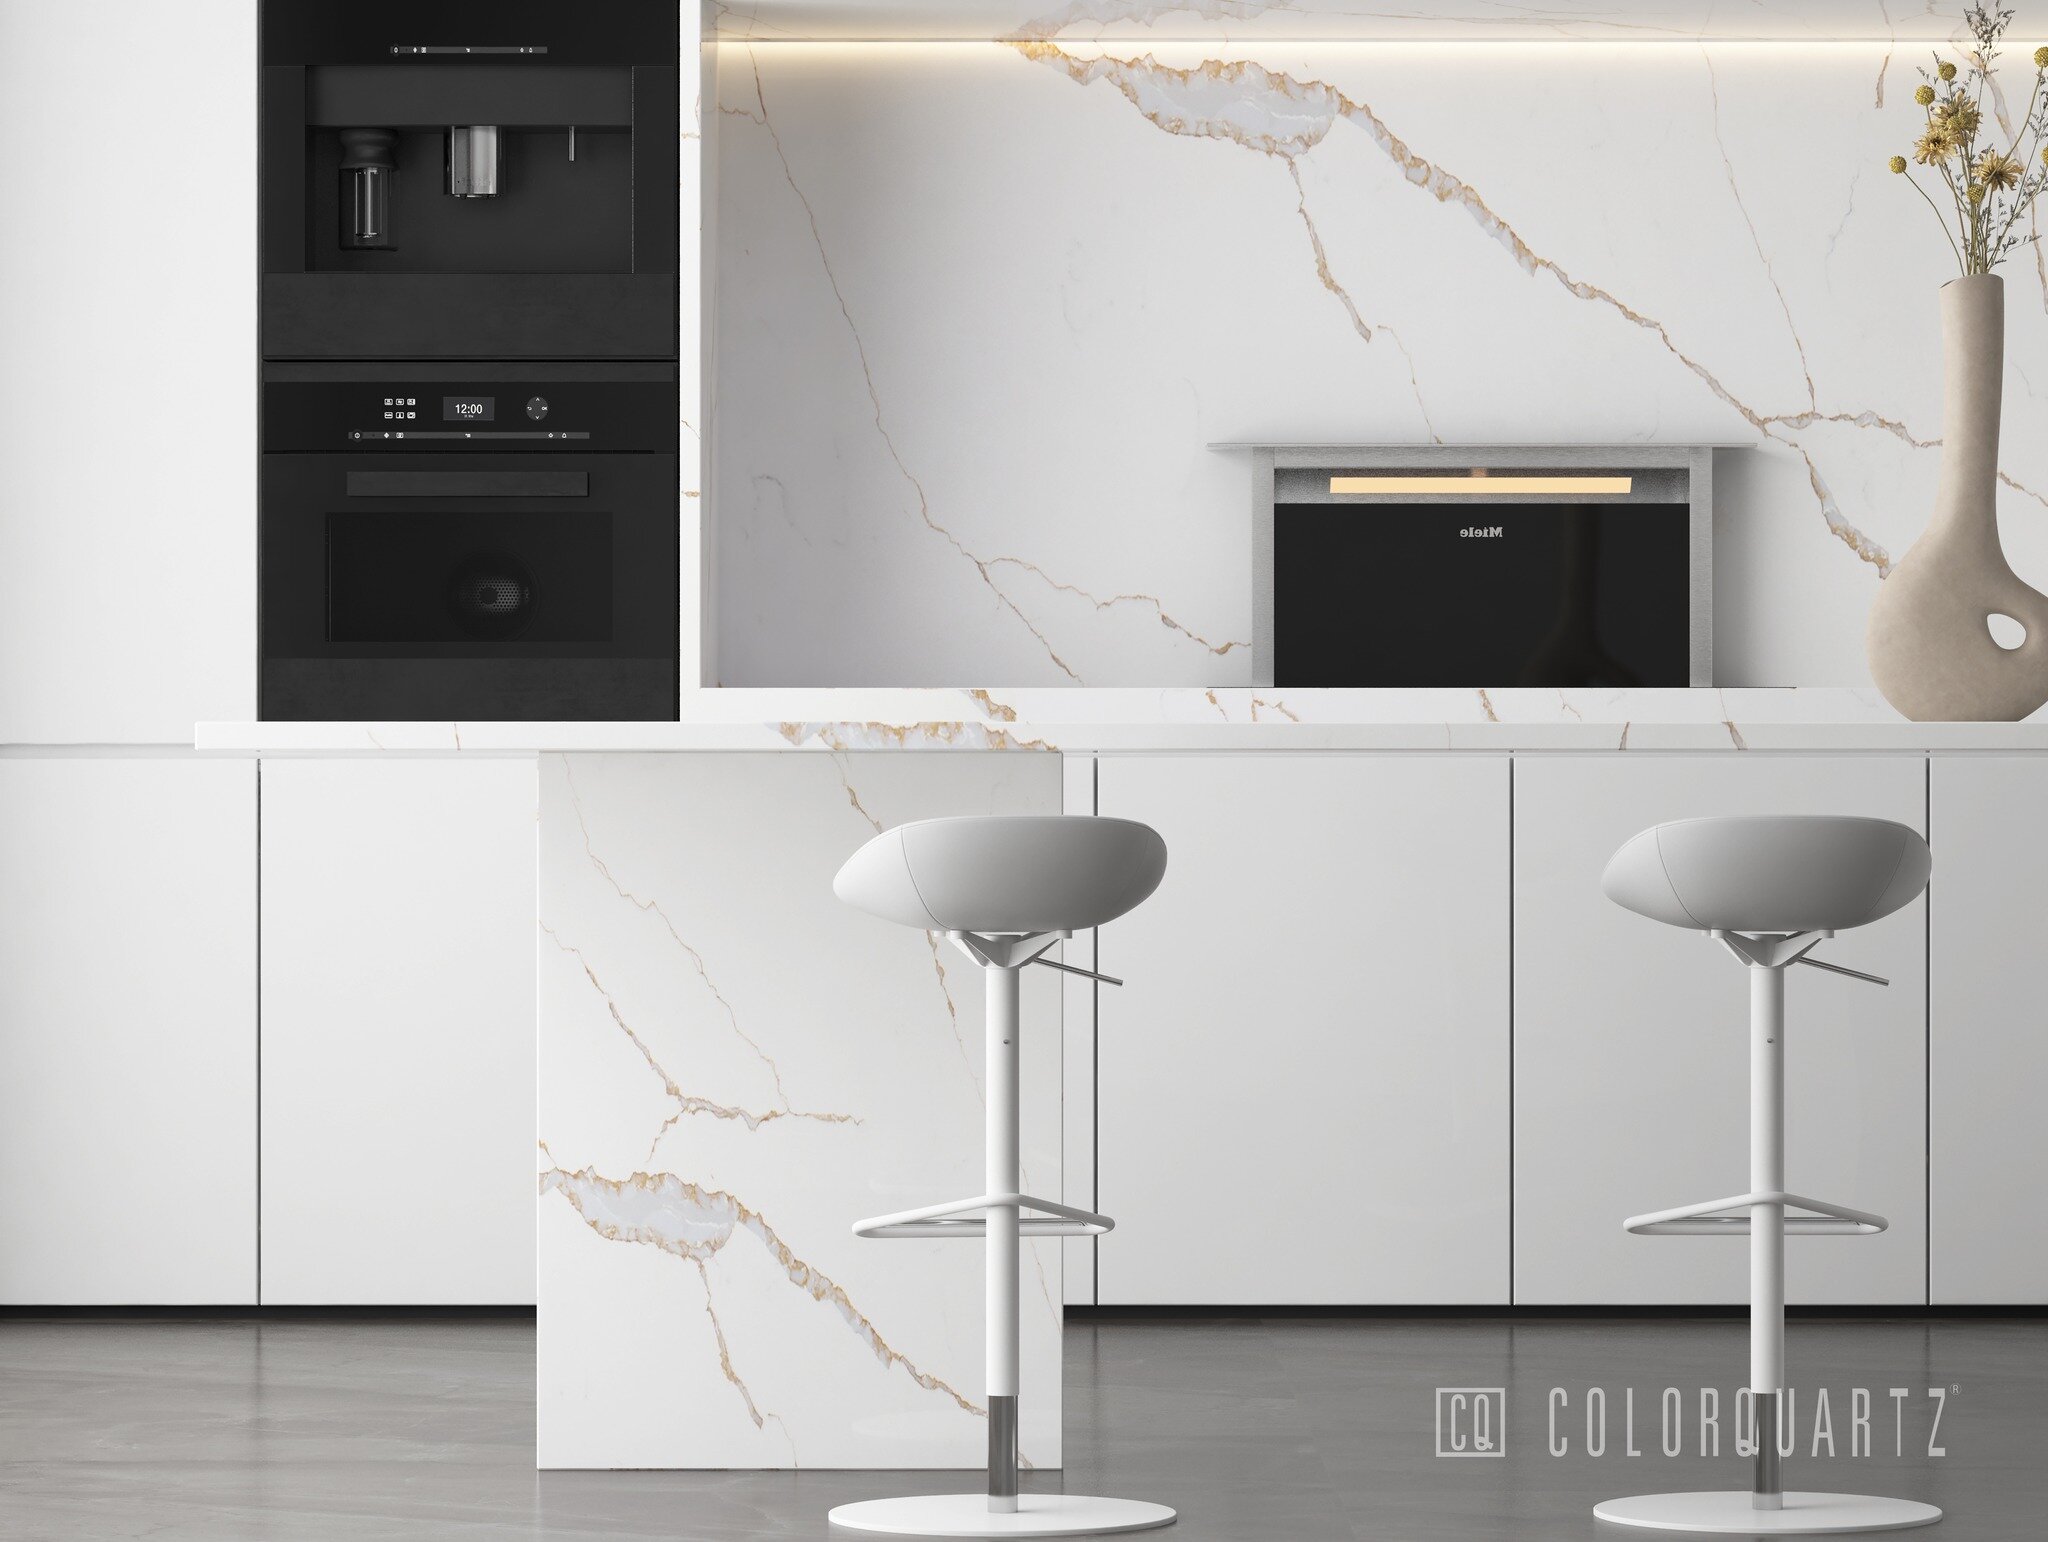 Bringing the glamour with our CQ982 Calacatta Bettogli. Perfect for adding a touch of elegance to any room.

Discover now: http://colorquartz.com

#Colorquartz #CQ #CQ982 #CalacattaBettogli #homedecorating #kitchen #interiors #kitchenremodel #kitchen